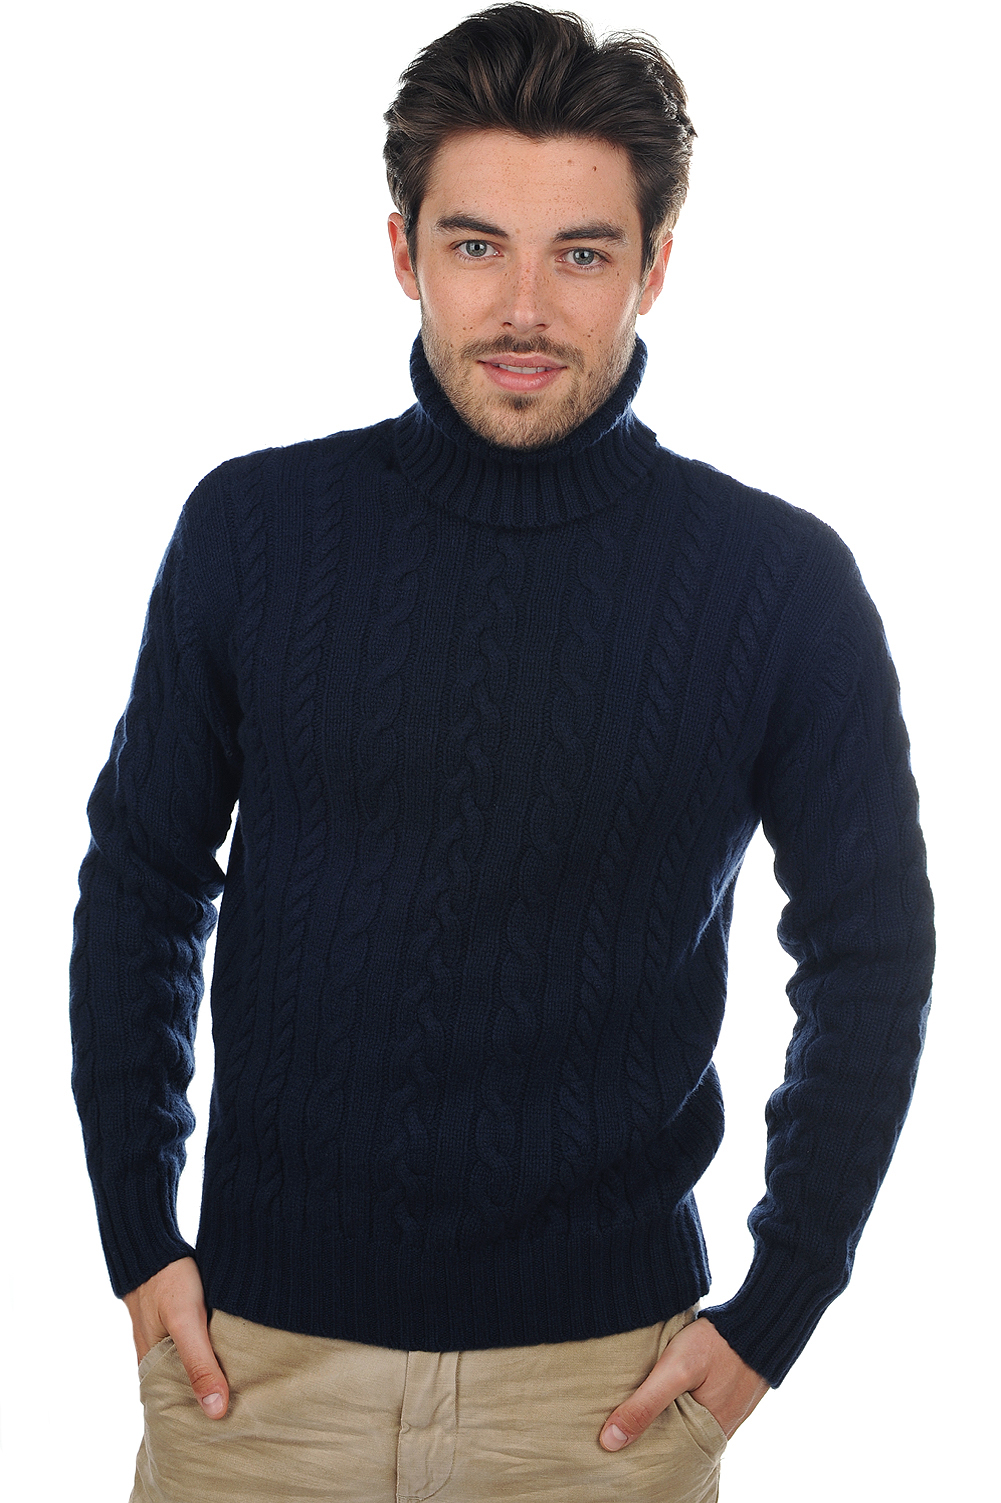 Cachemire pull homme lucas marine fonce m